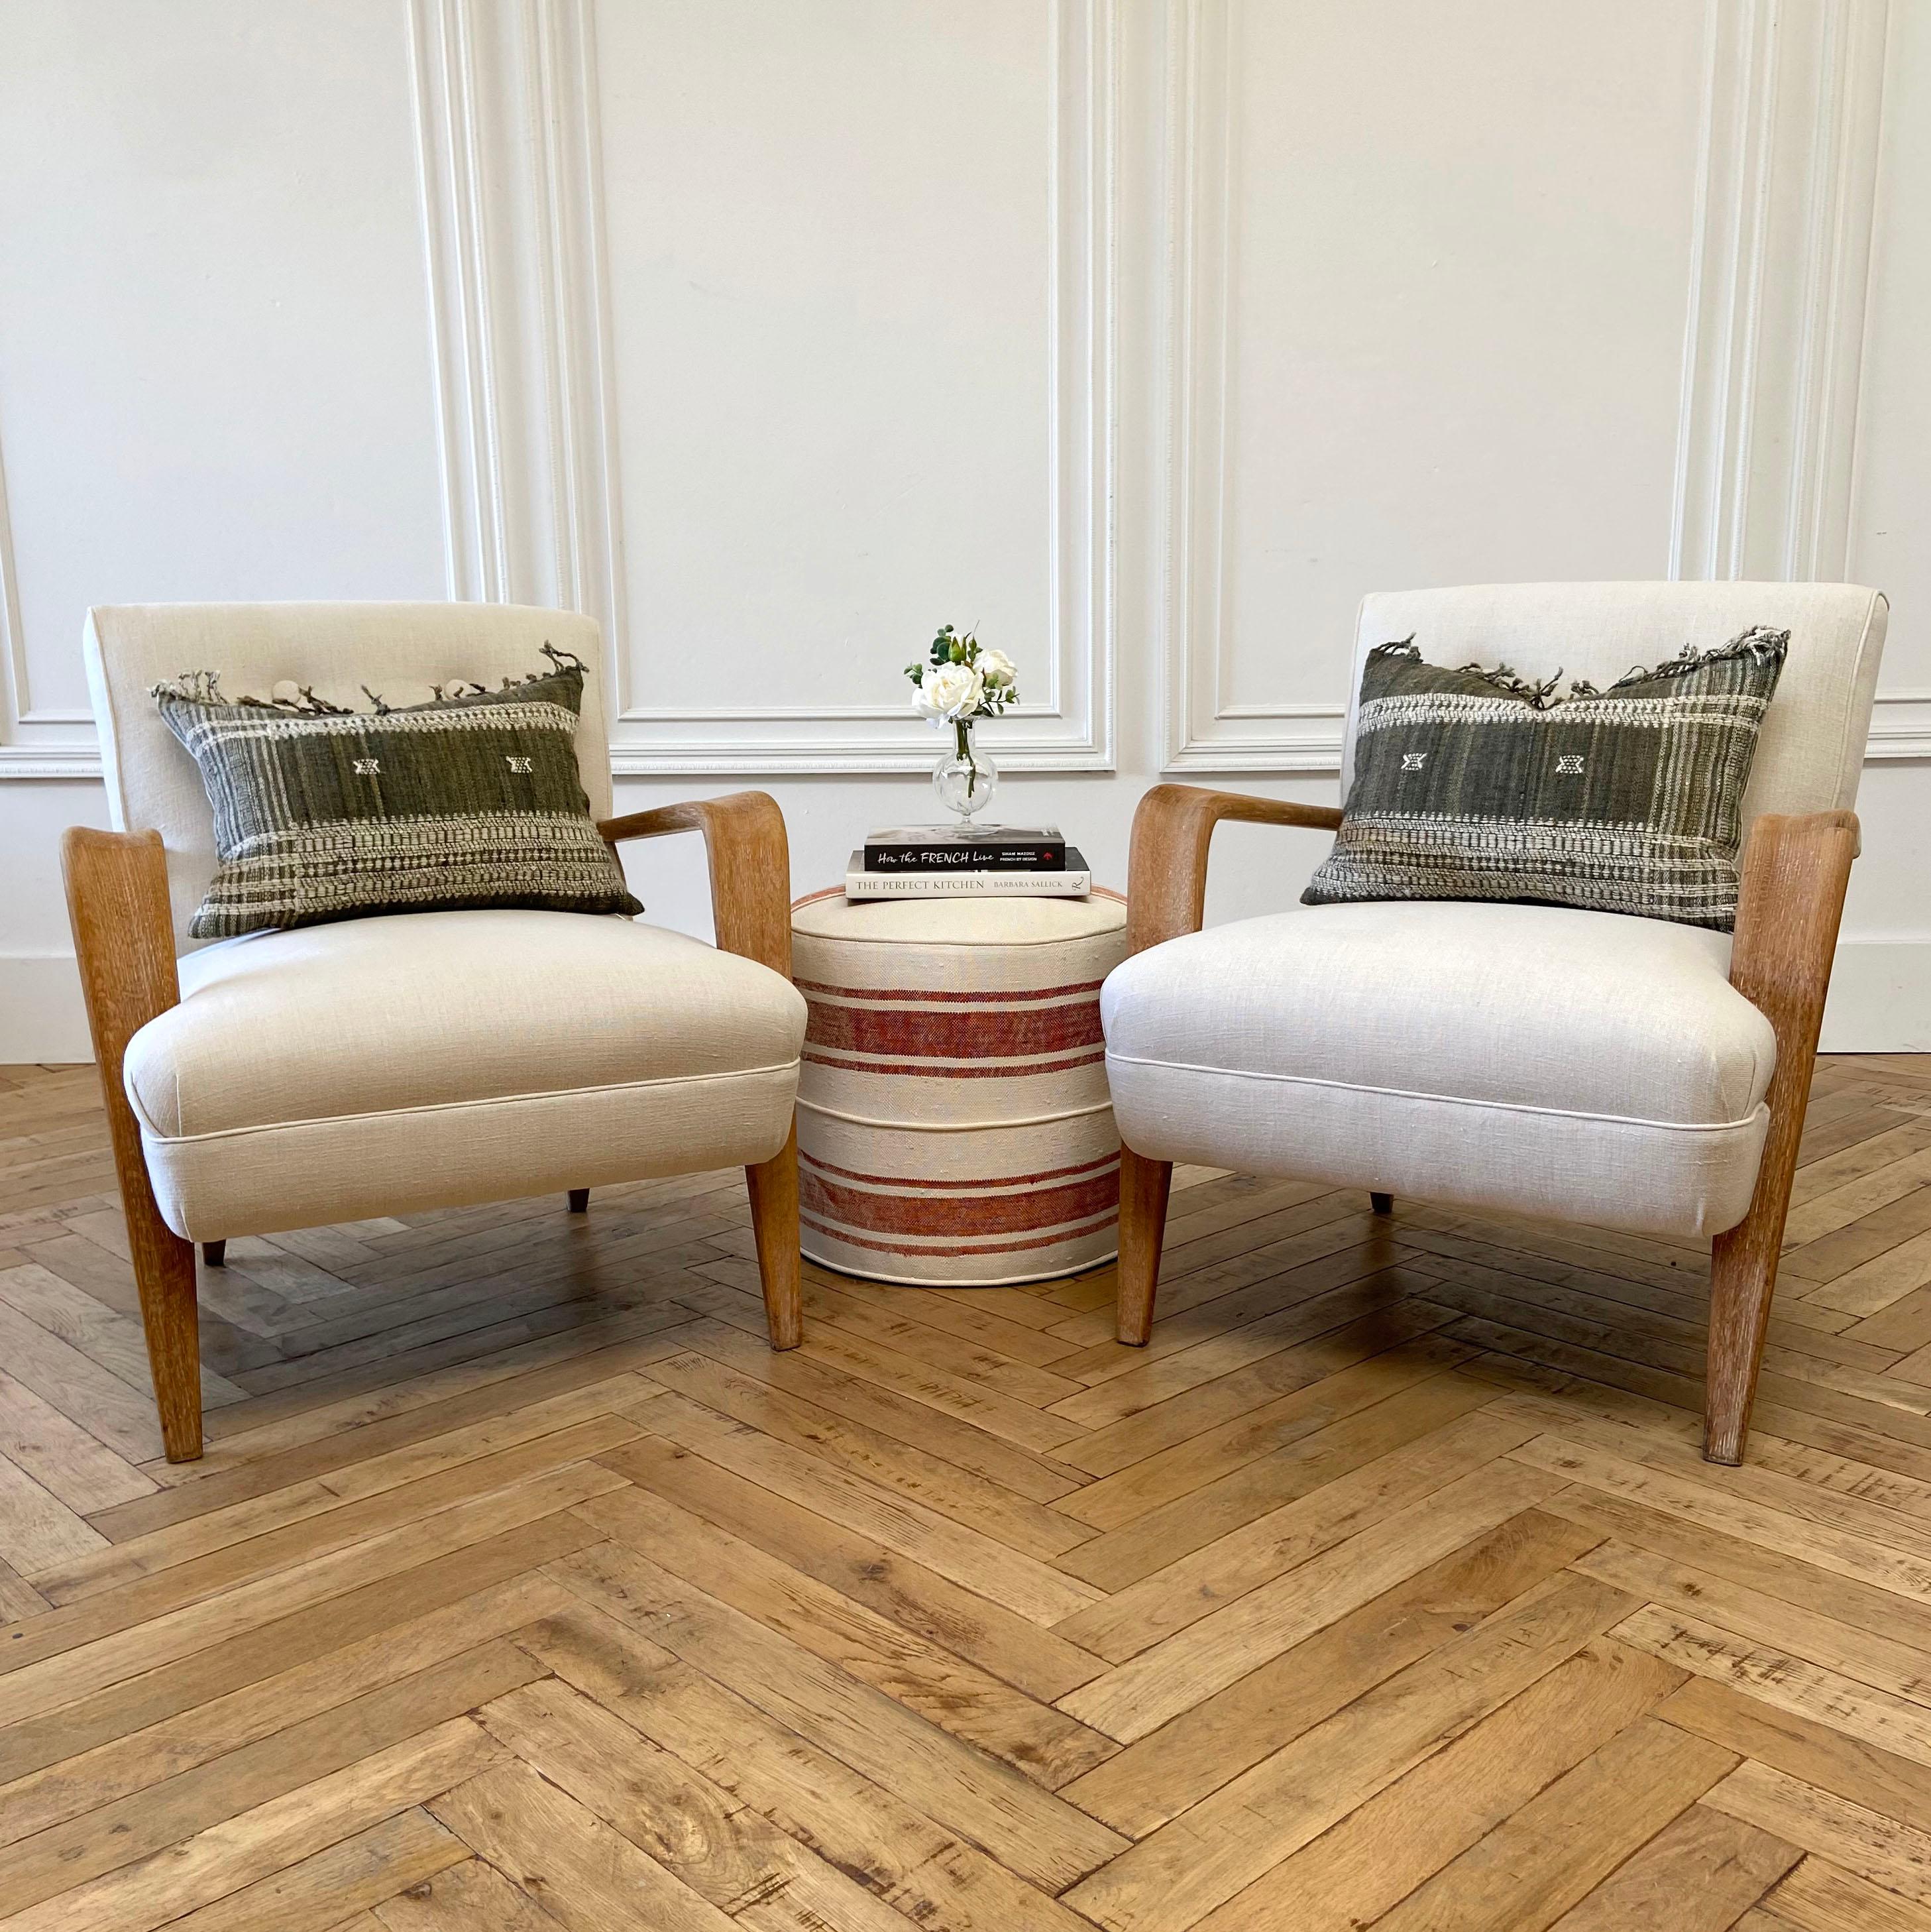 Pair of vintage Mid-Century Modern upholstered chairs with white oak frame
Upholstered in our 100% organic natural Libeco Linen, with original style upholstery with button back, and welt trim. These arms and leg frame have a stripped wood finish,